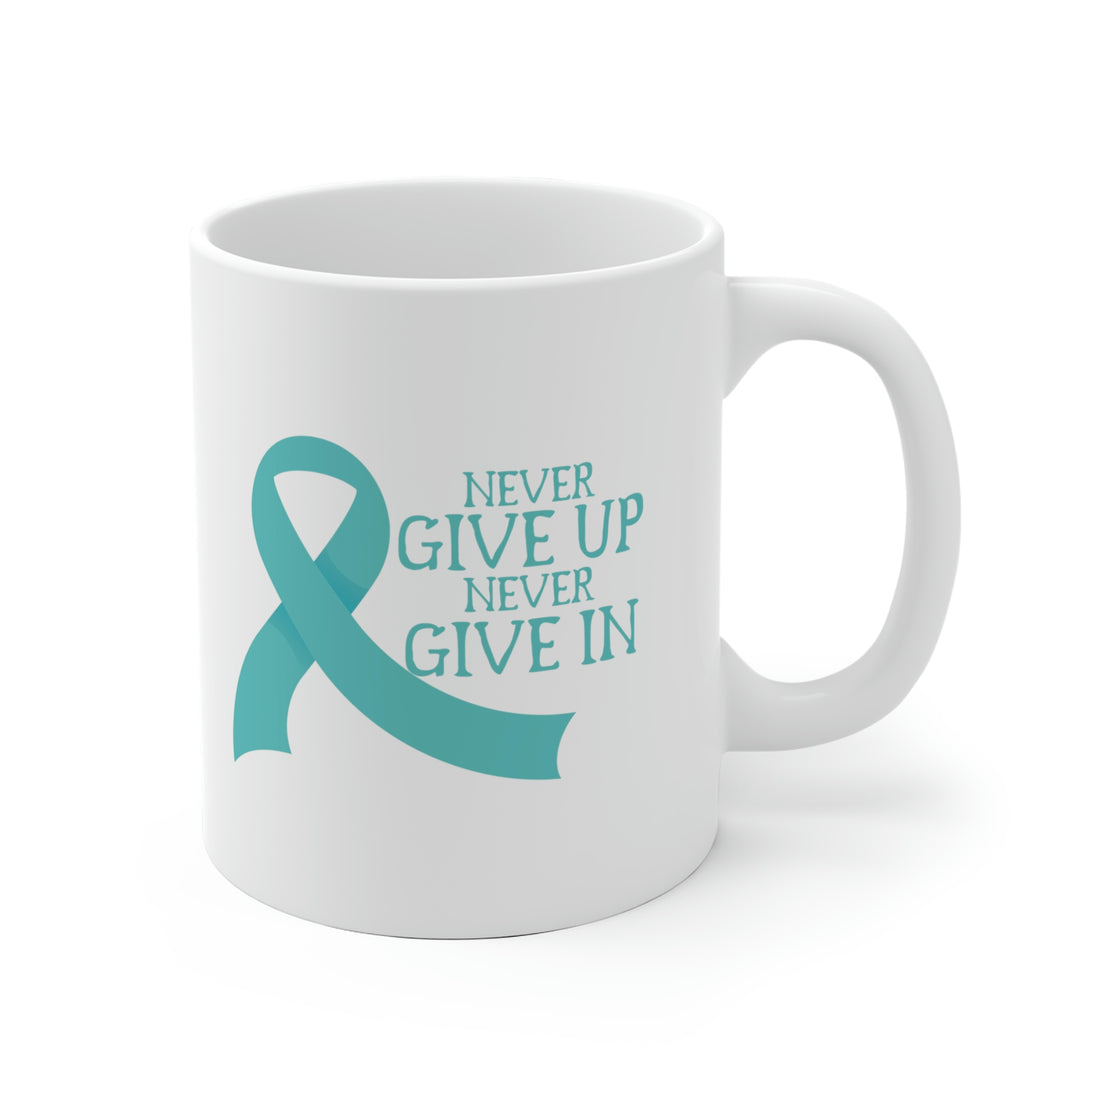 Never Give Up Never Give In - White Ceramic Mug 2 sizes Available